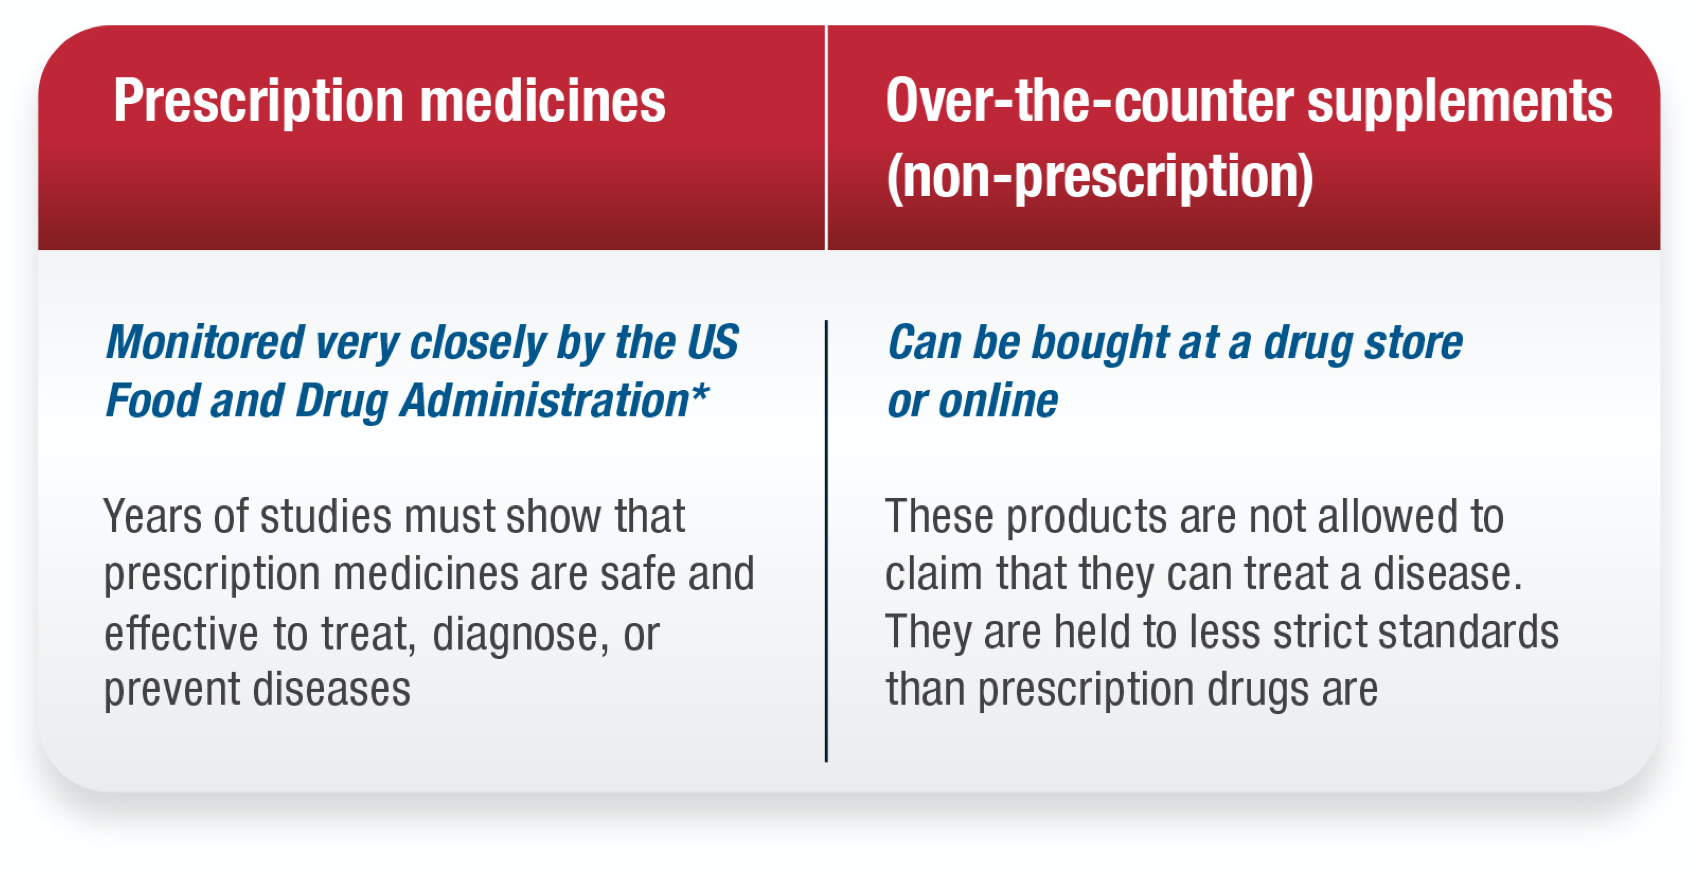 How is ID or IDA Treated? A table shows the differences between prescription medication compared to over-the-counter options